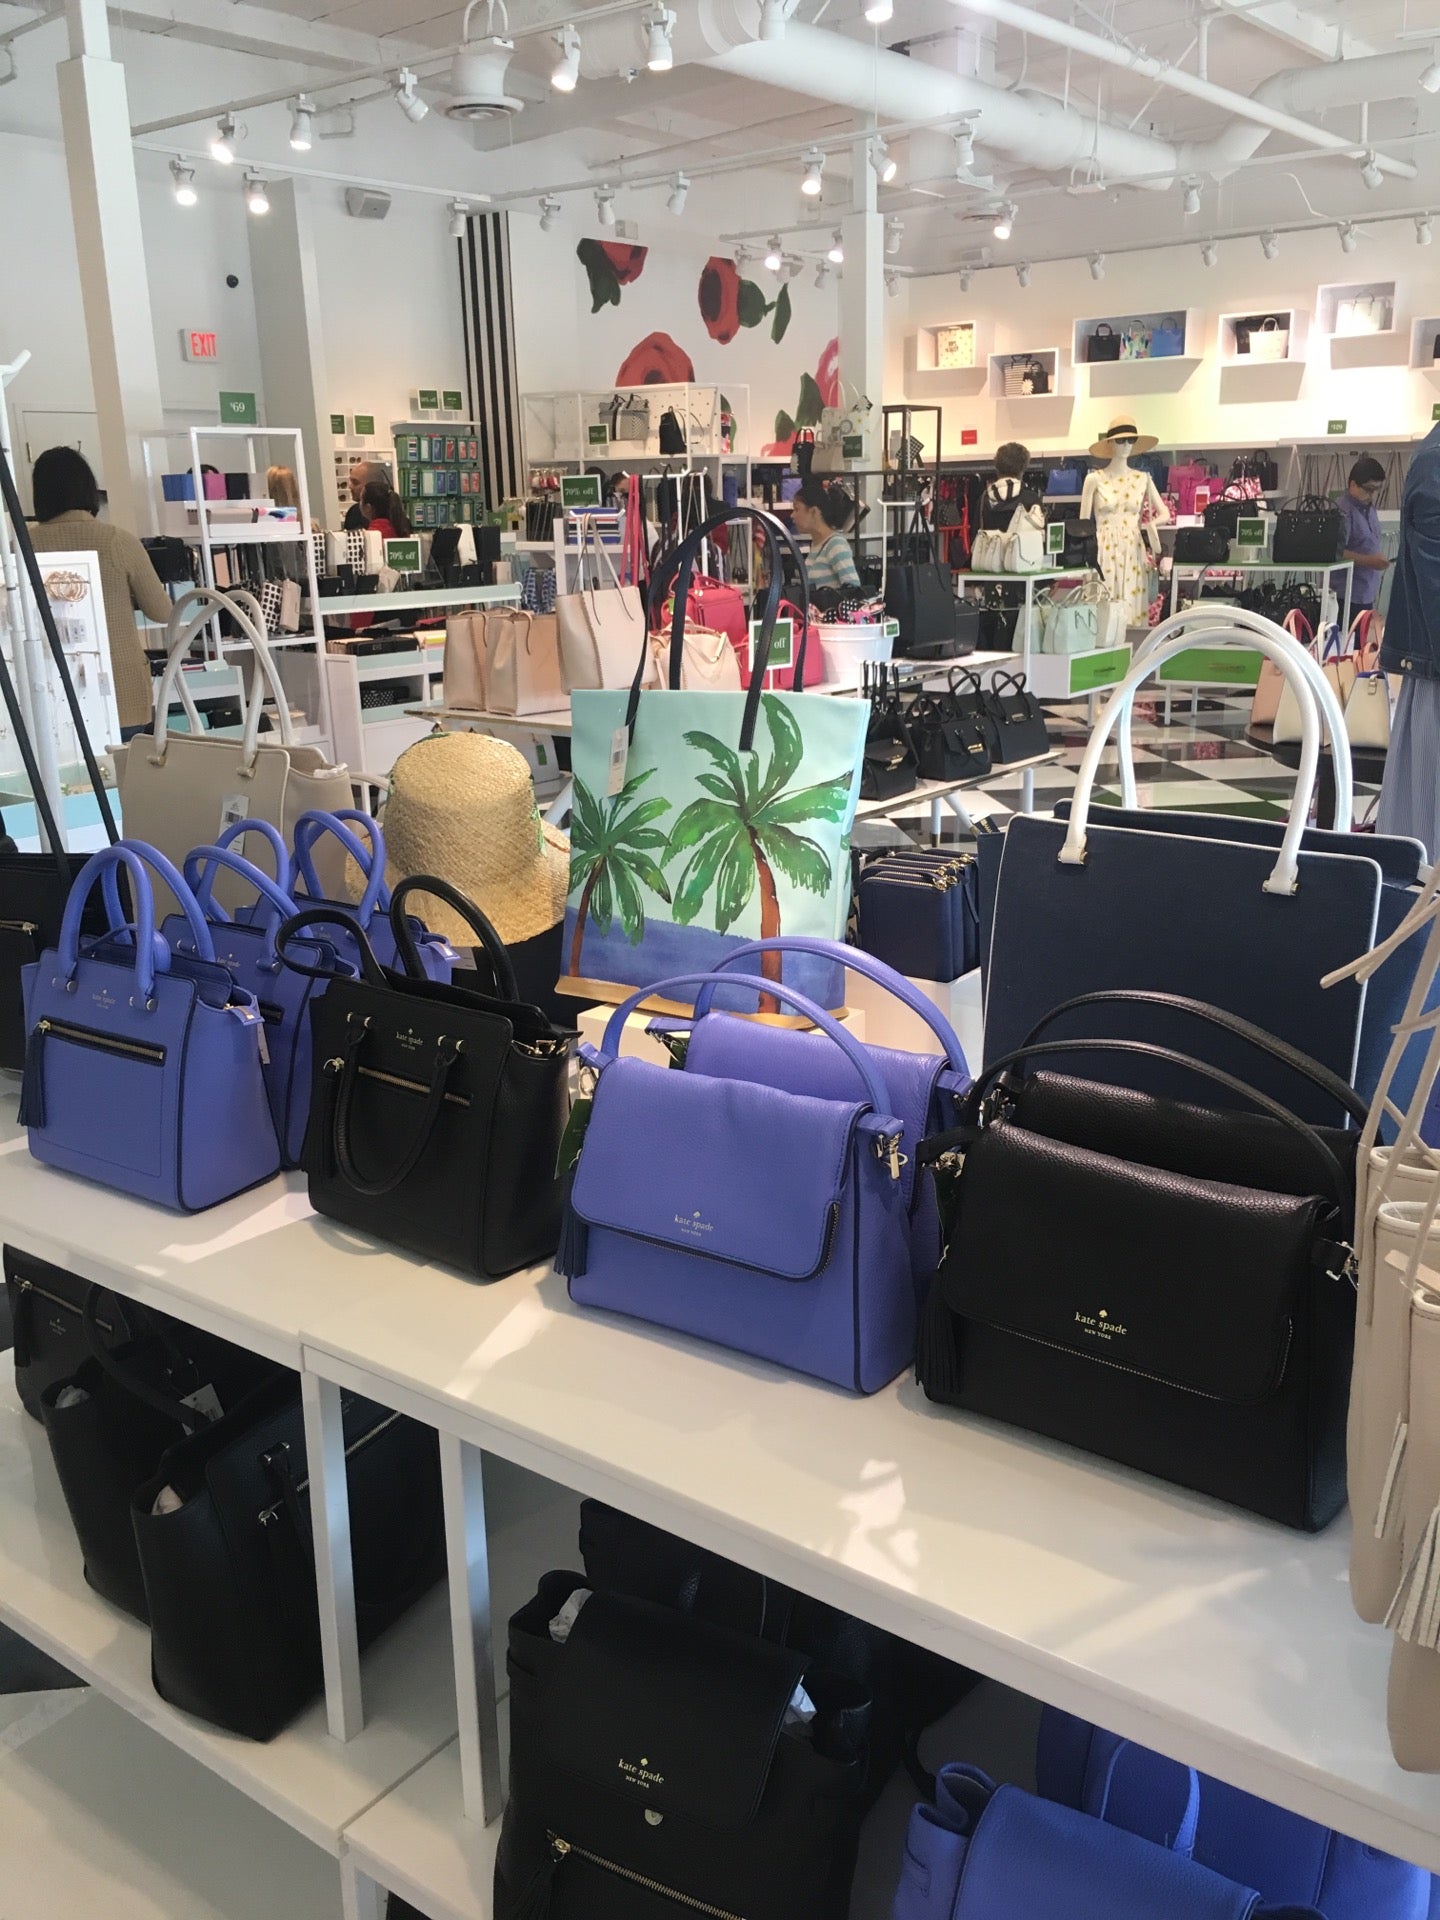 kate spade outlet, Bags